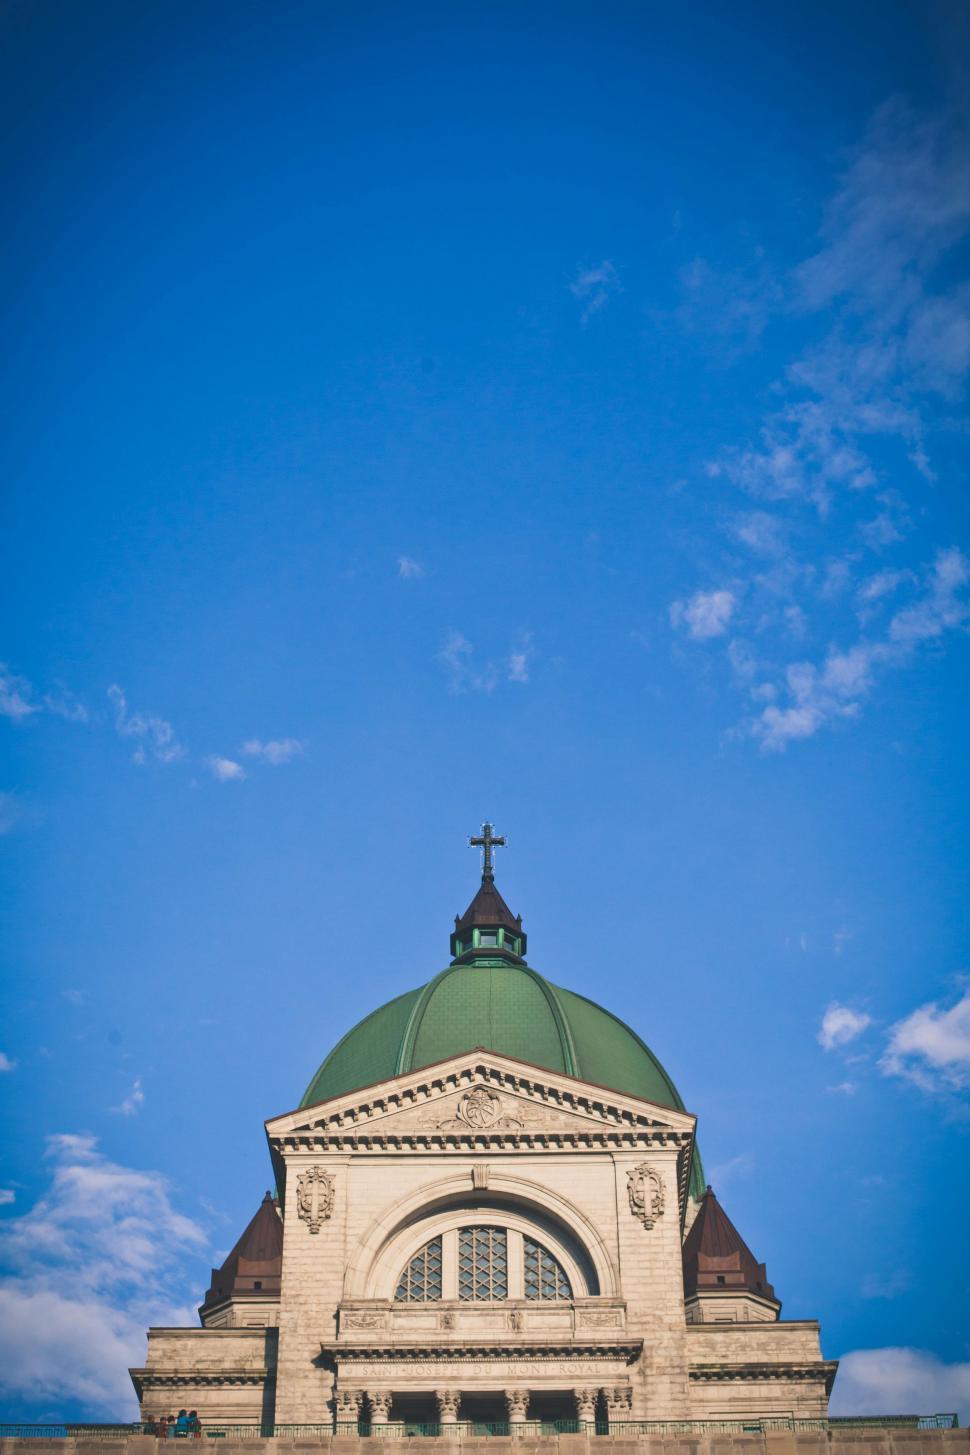 Free Image of Large Building With Green Dome on Top 